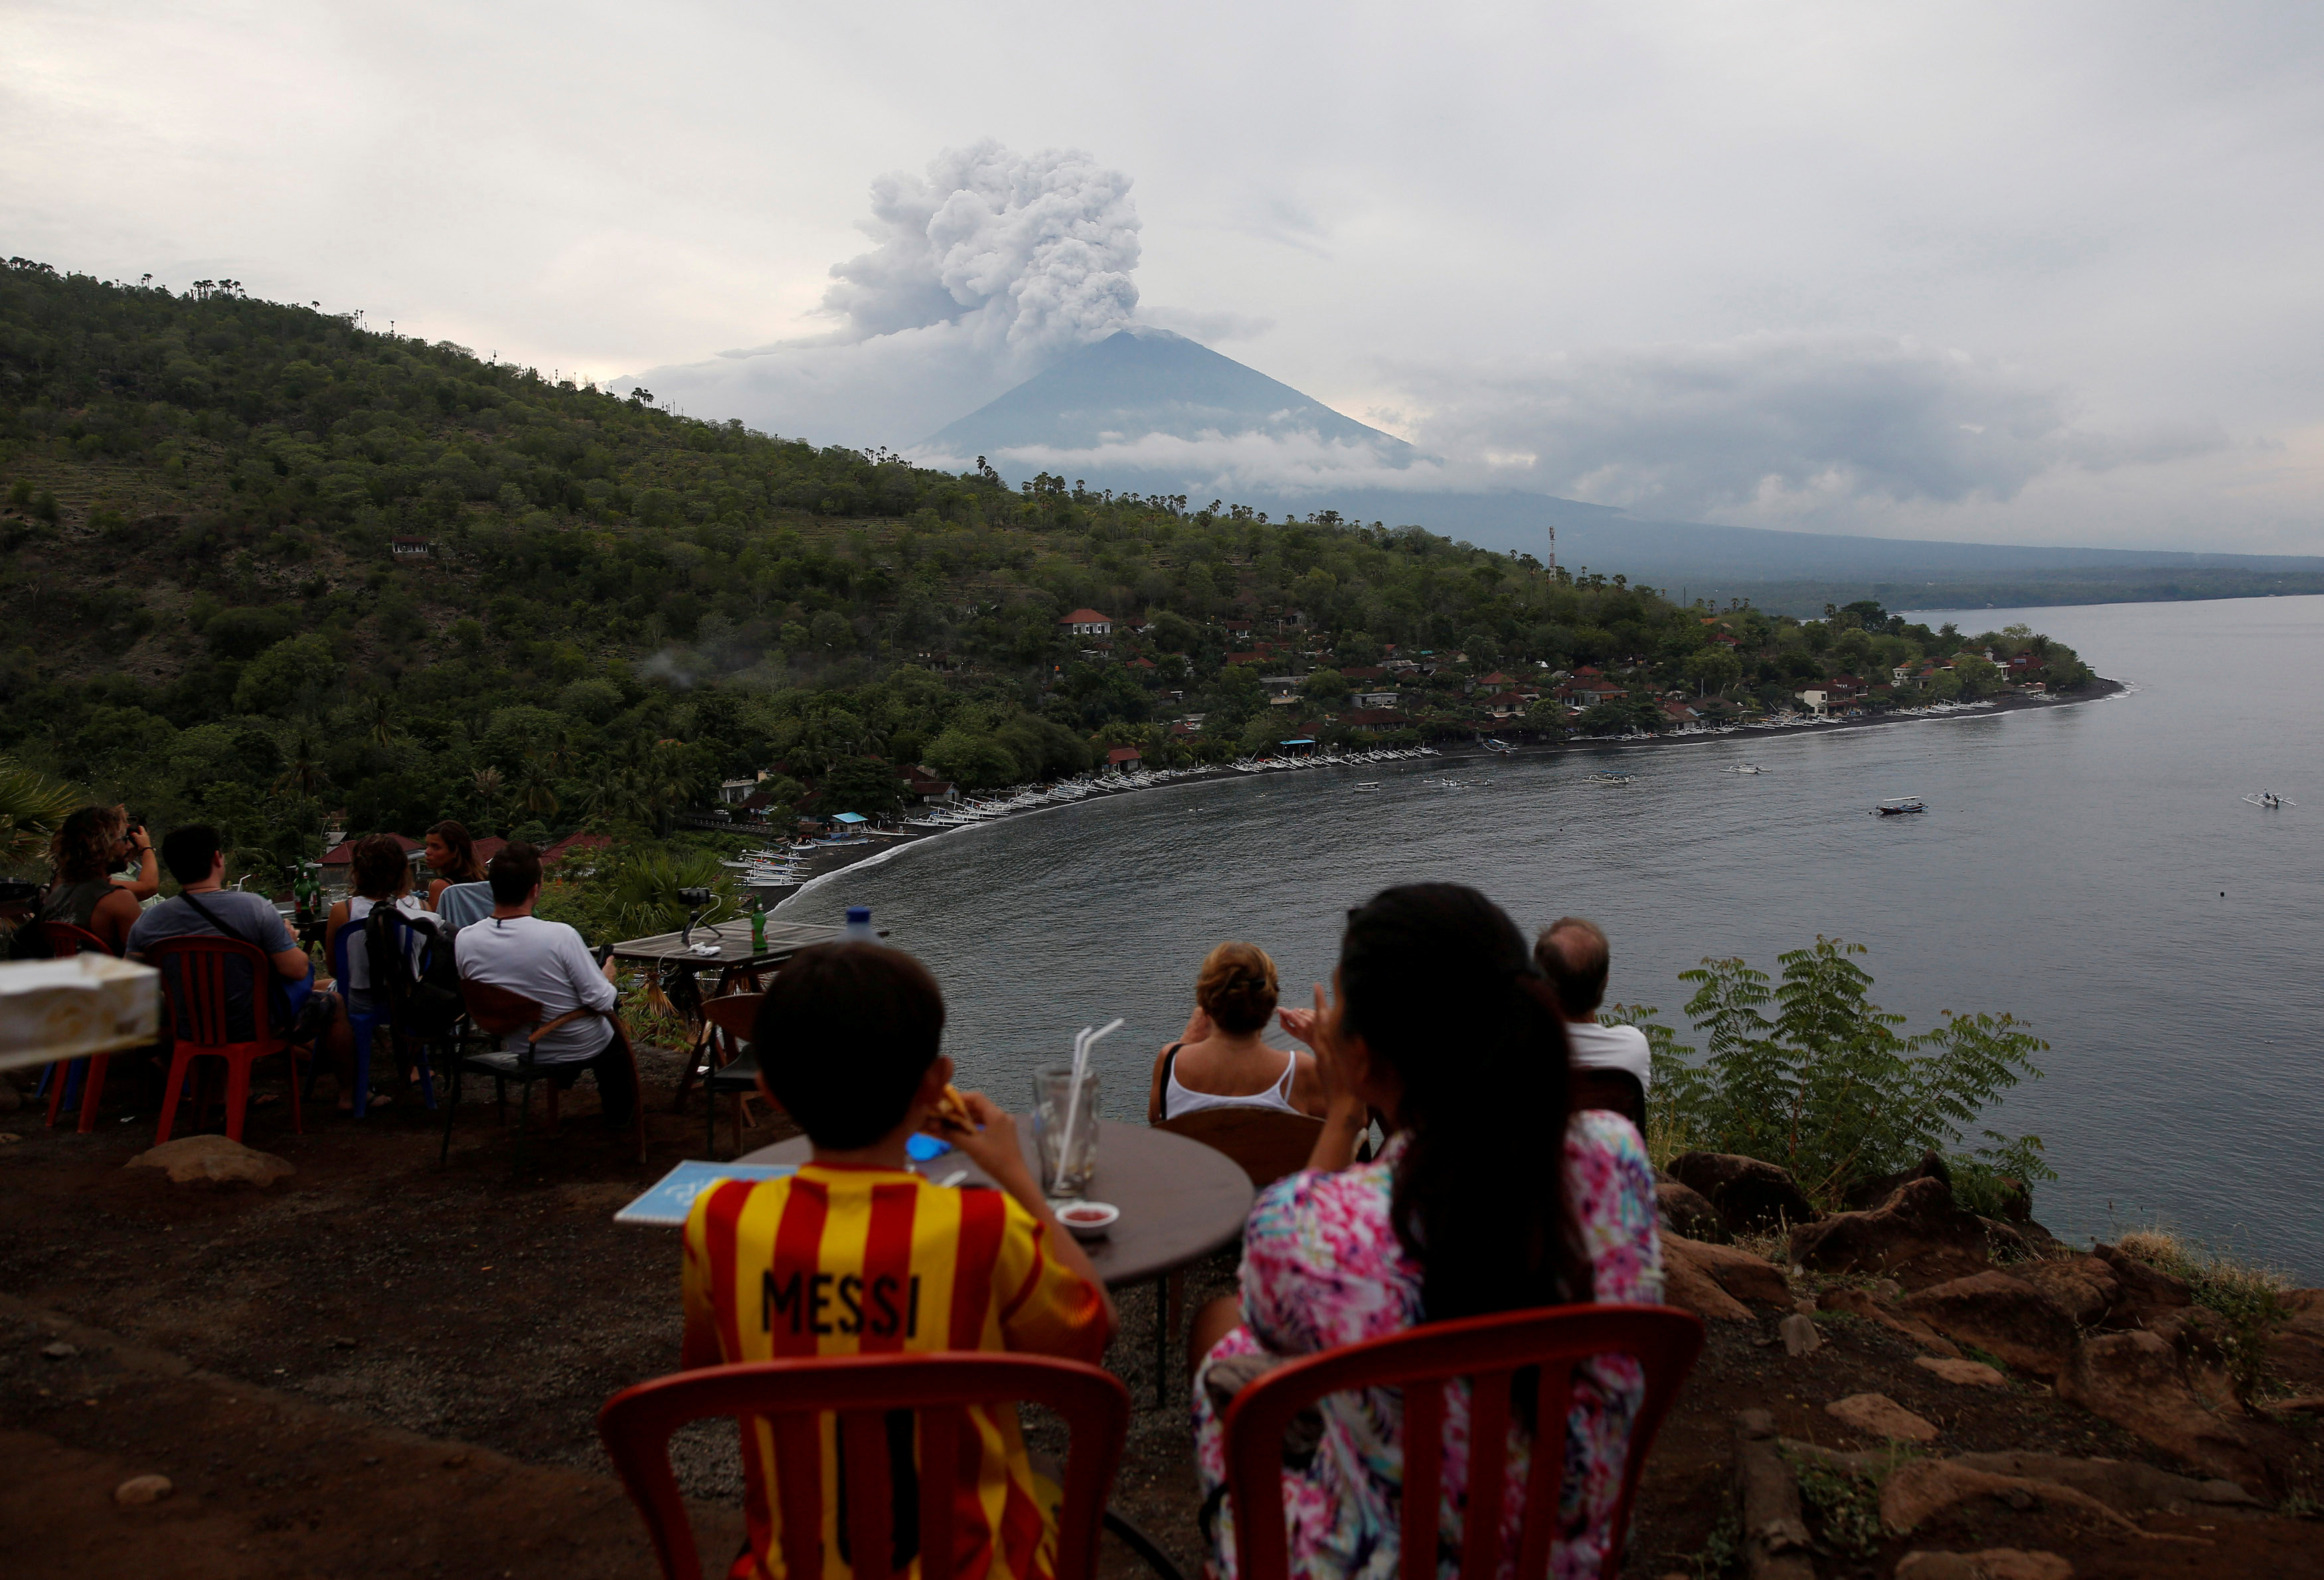 Bali paradise turns to tourist nightmare as volcano rumbles